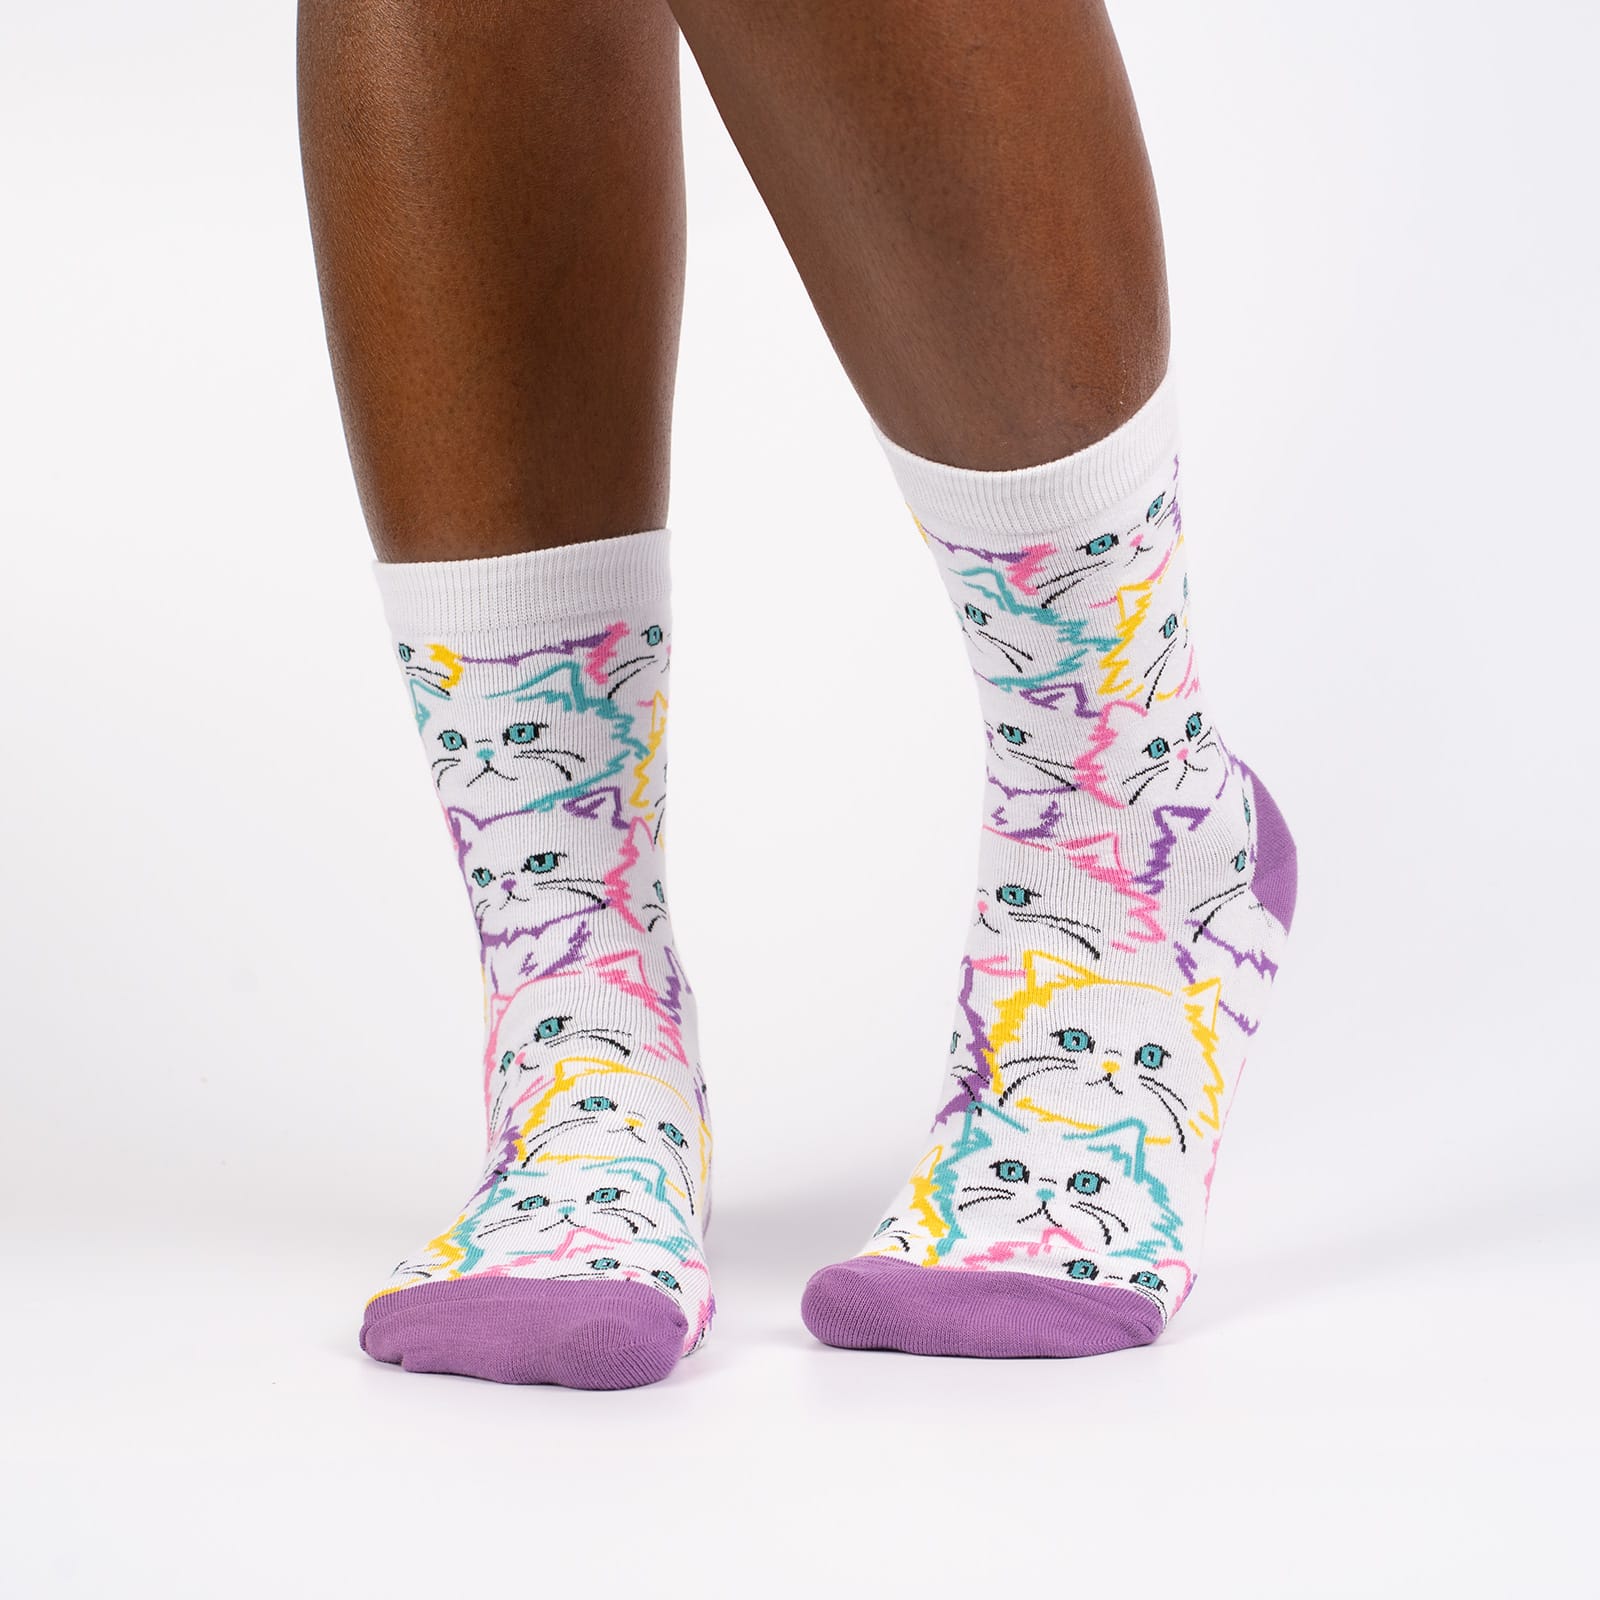 Sock It To Me Fur Real women's crew sock featuring white sock with lavender heel and toe with white cats outlined in pastel colors. Socks worn by model seen from front. 